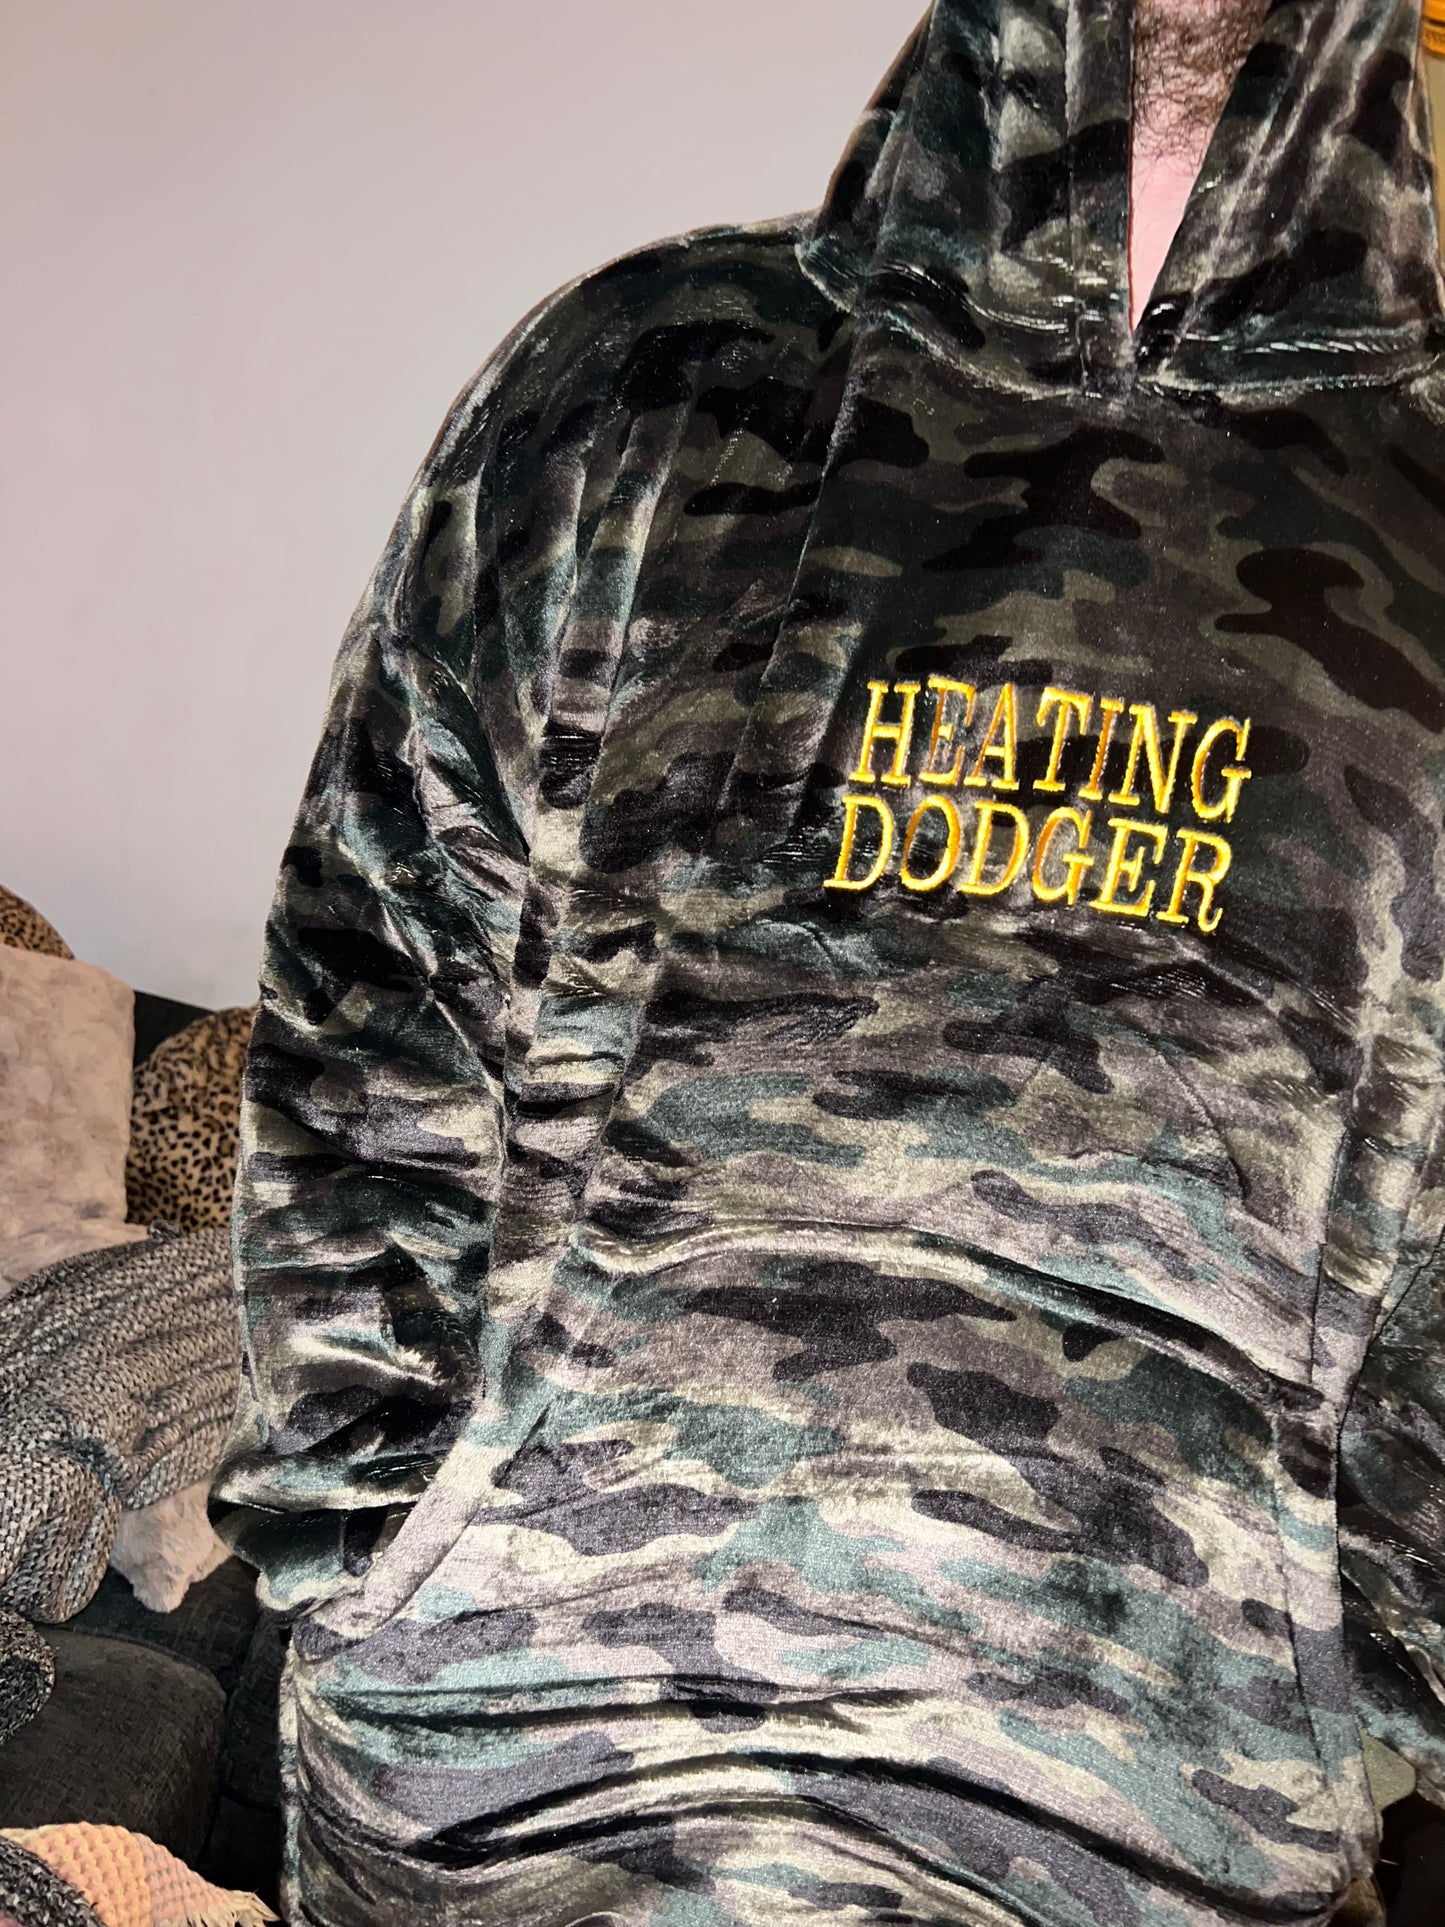 Embroidered Oversized Adults Blanket Hoodie